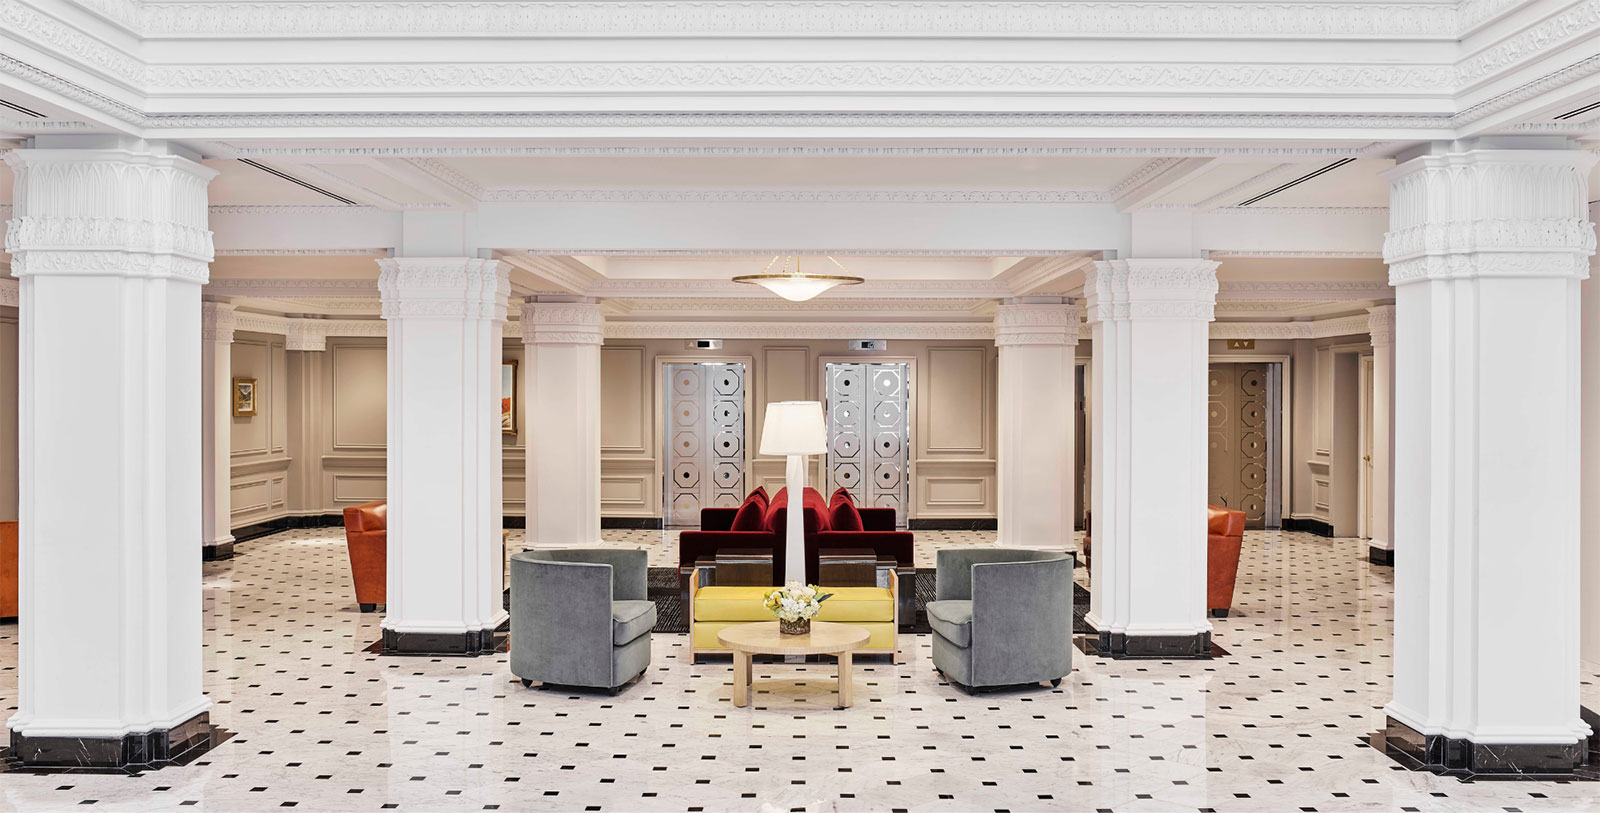 Discover the refined Beaux-Arts inspired architecture of the Hamilton Hotel.